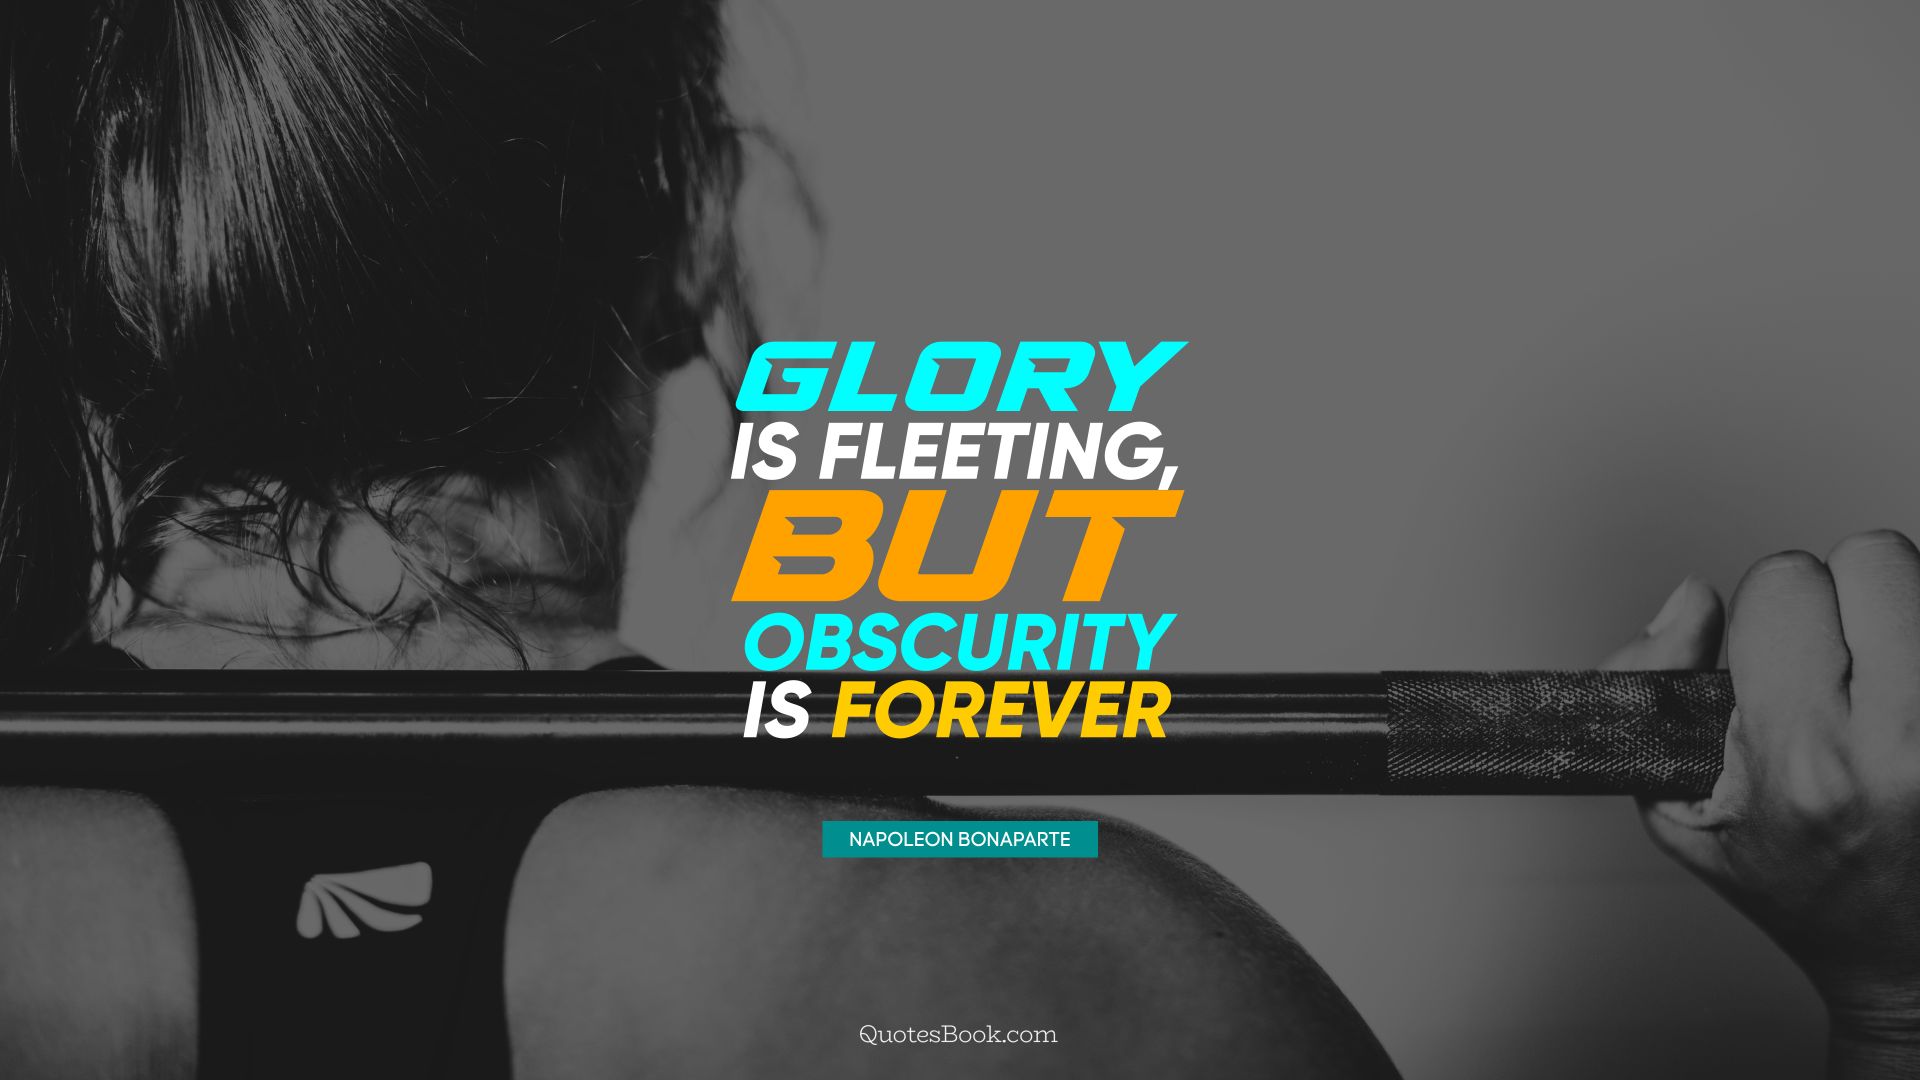 Glory is fleeting, but obscurity is forever. - Quote by Napoleon Bonaparte